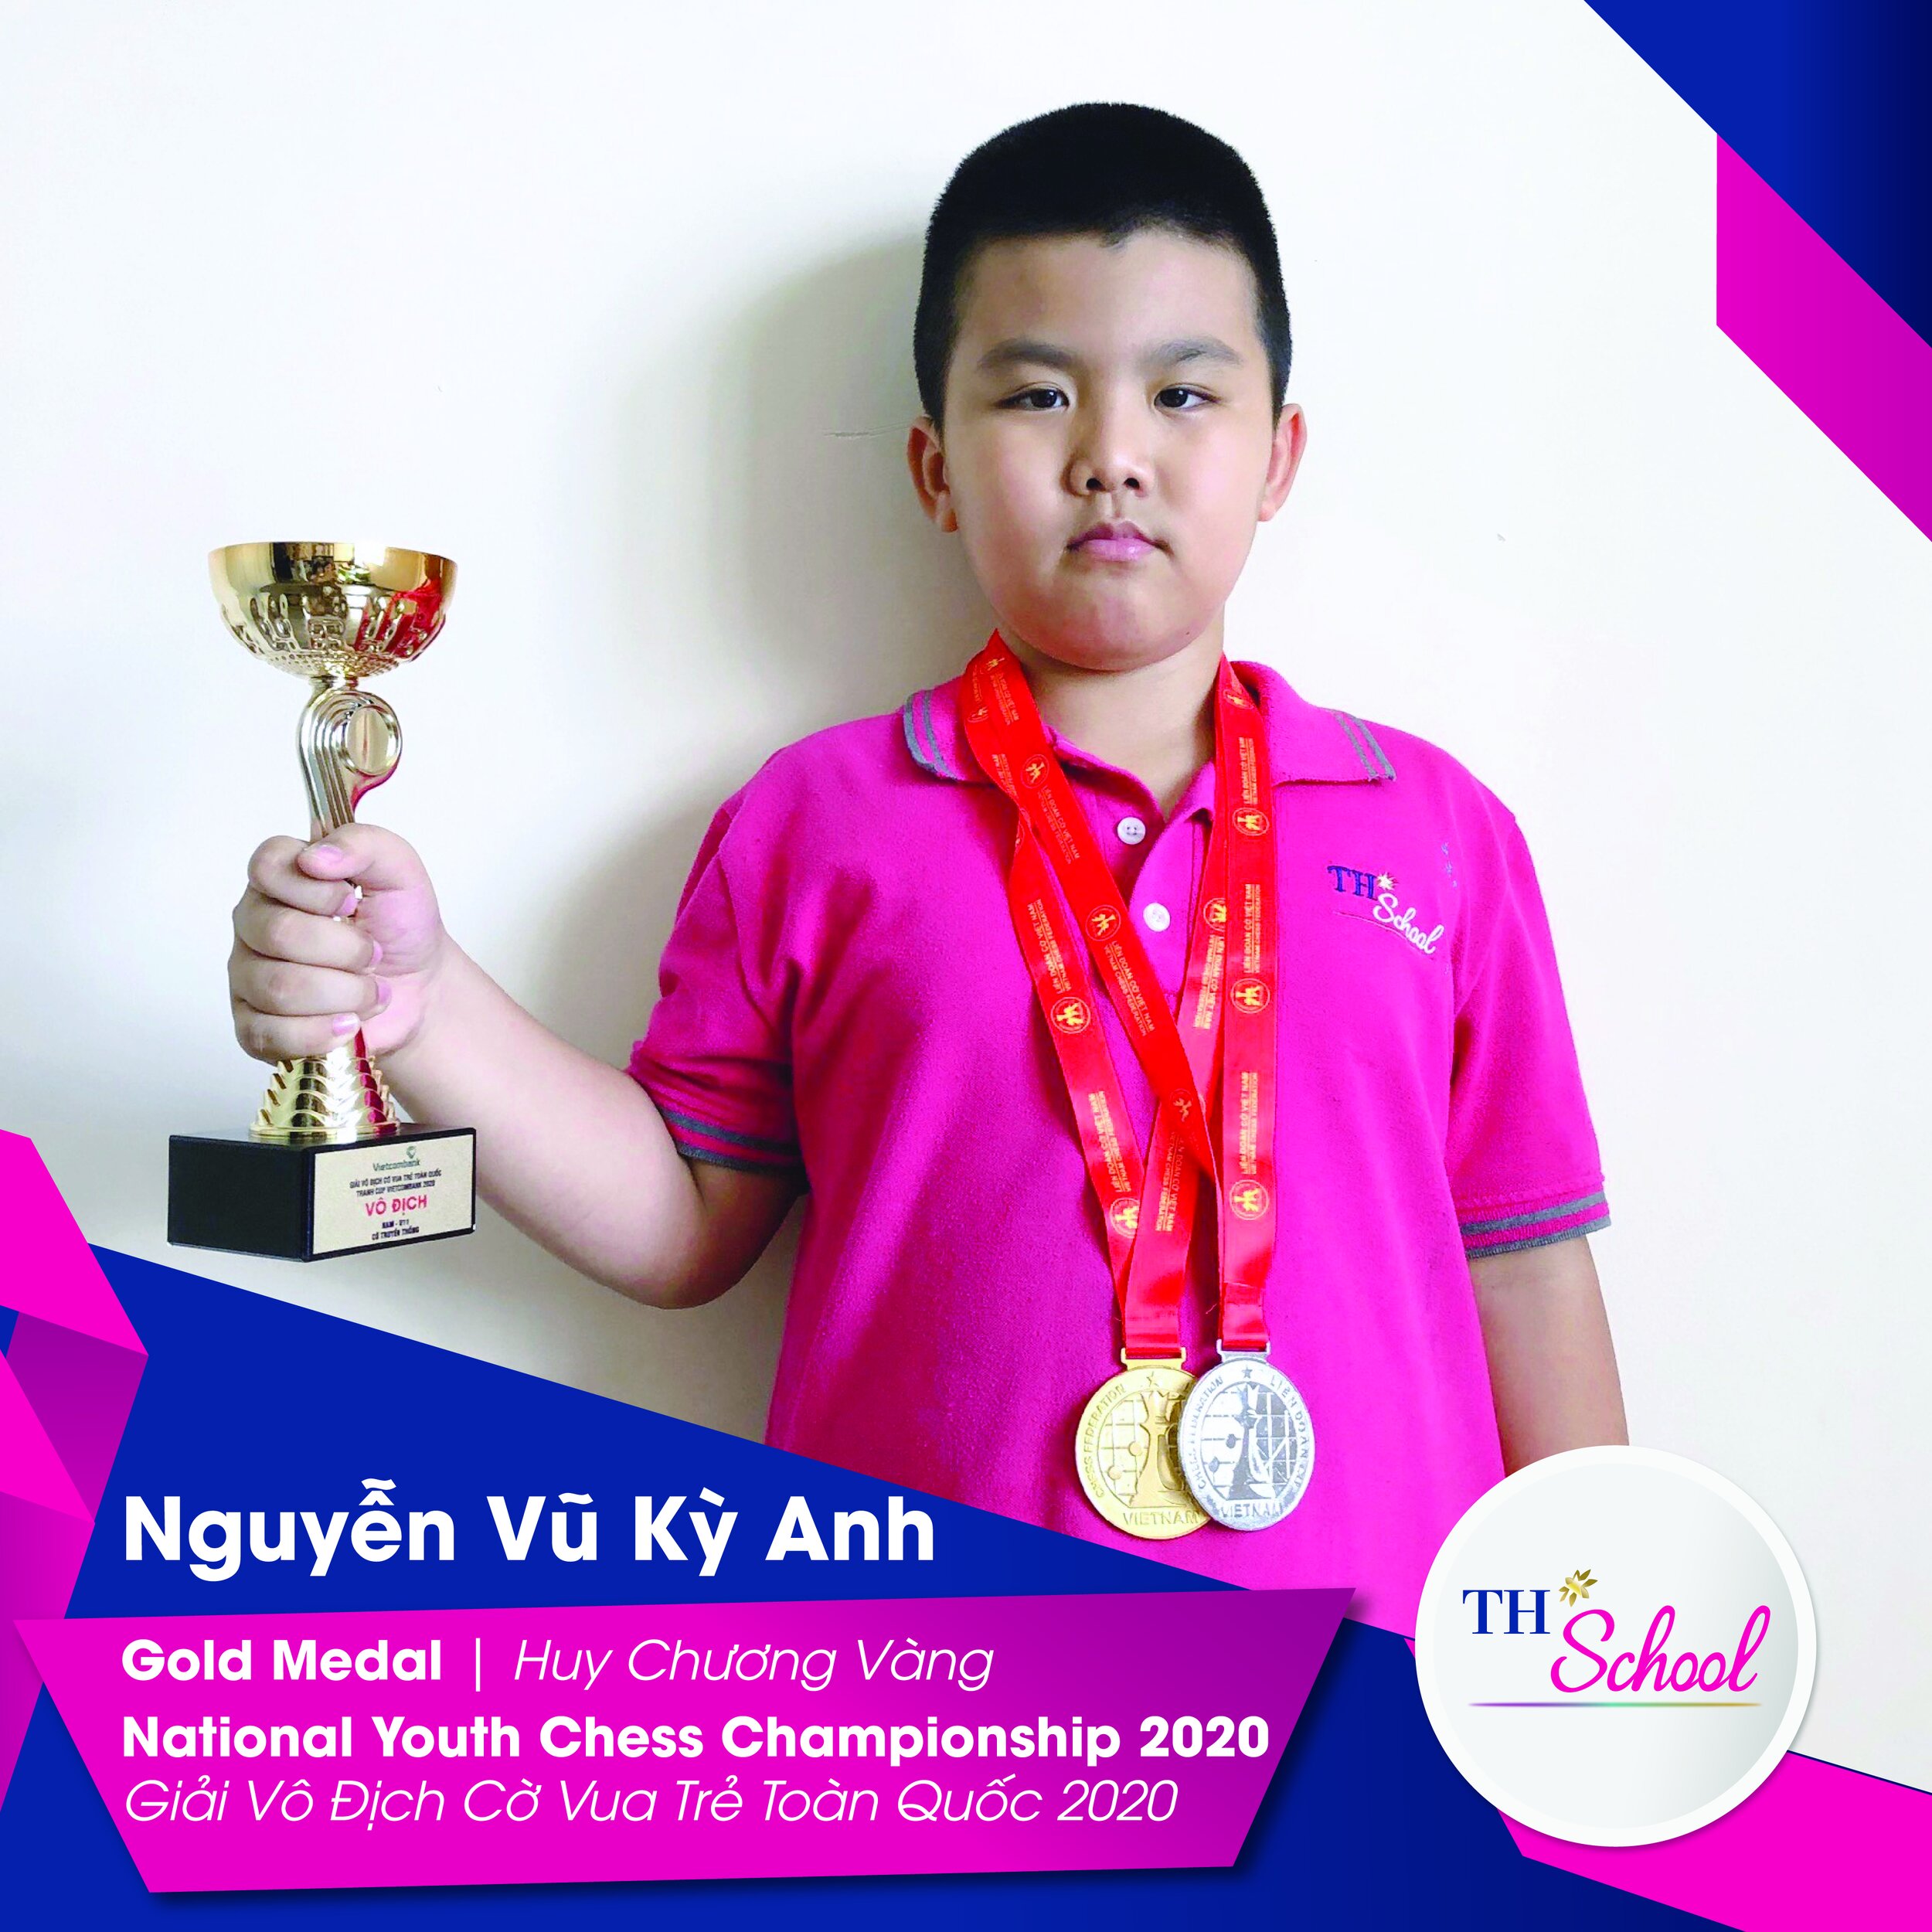 National Youth Chess Championship 2020